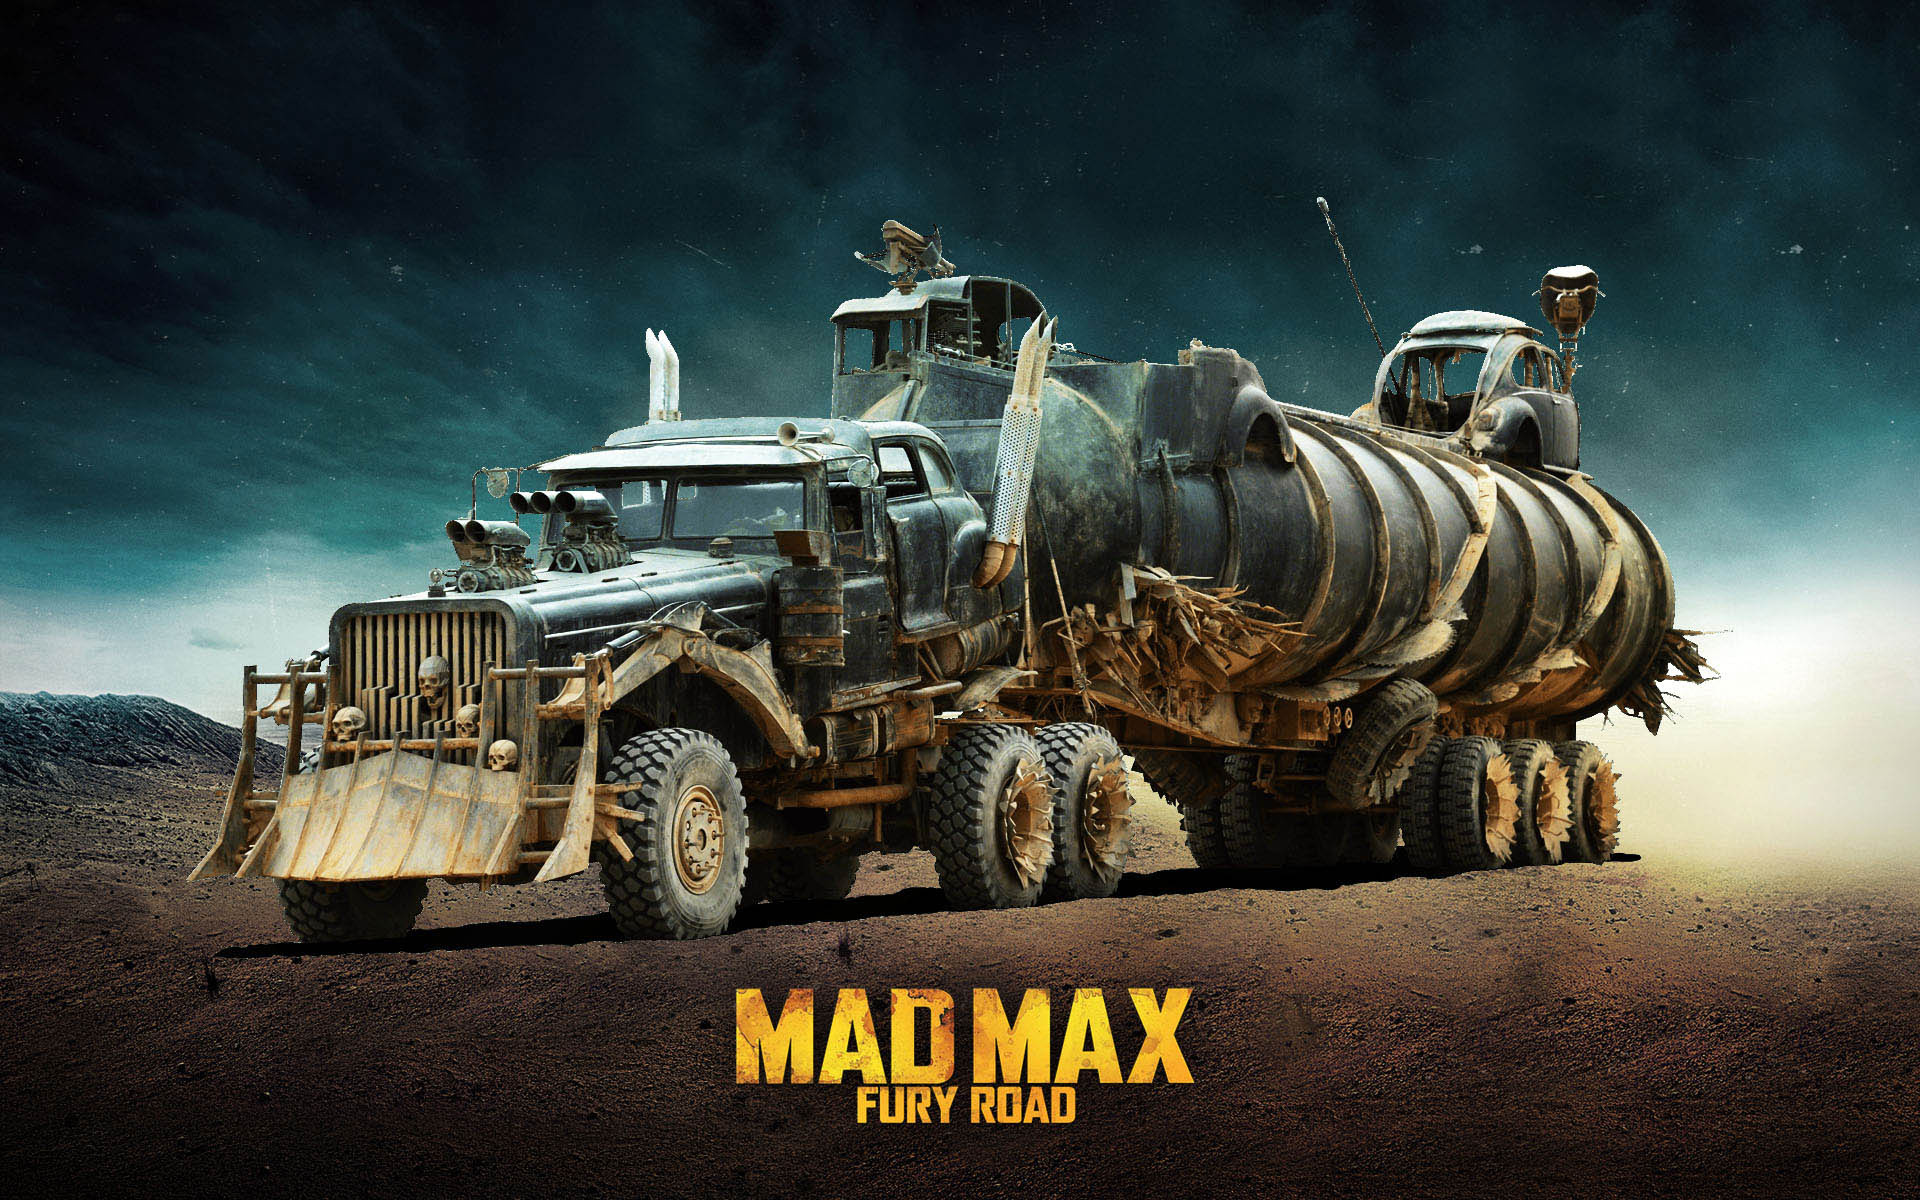 Mad Max: Fury Road: The fourth movie in the Mad Max franchise. 1920x1200 HD Wallpaper.